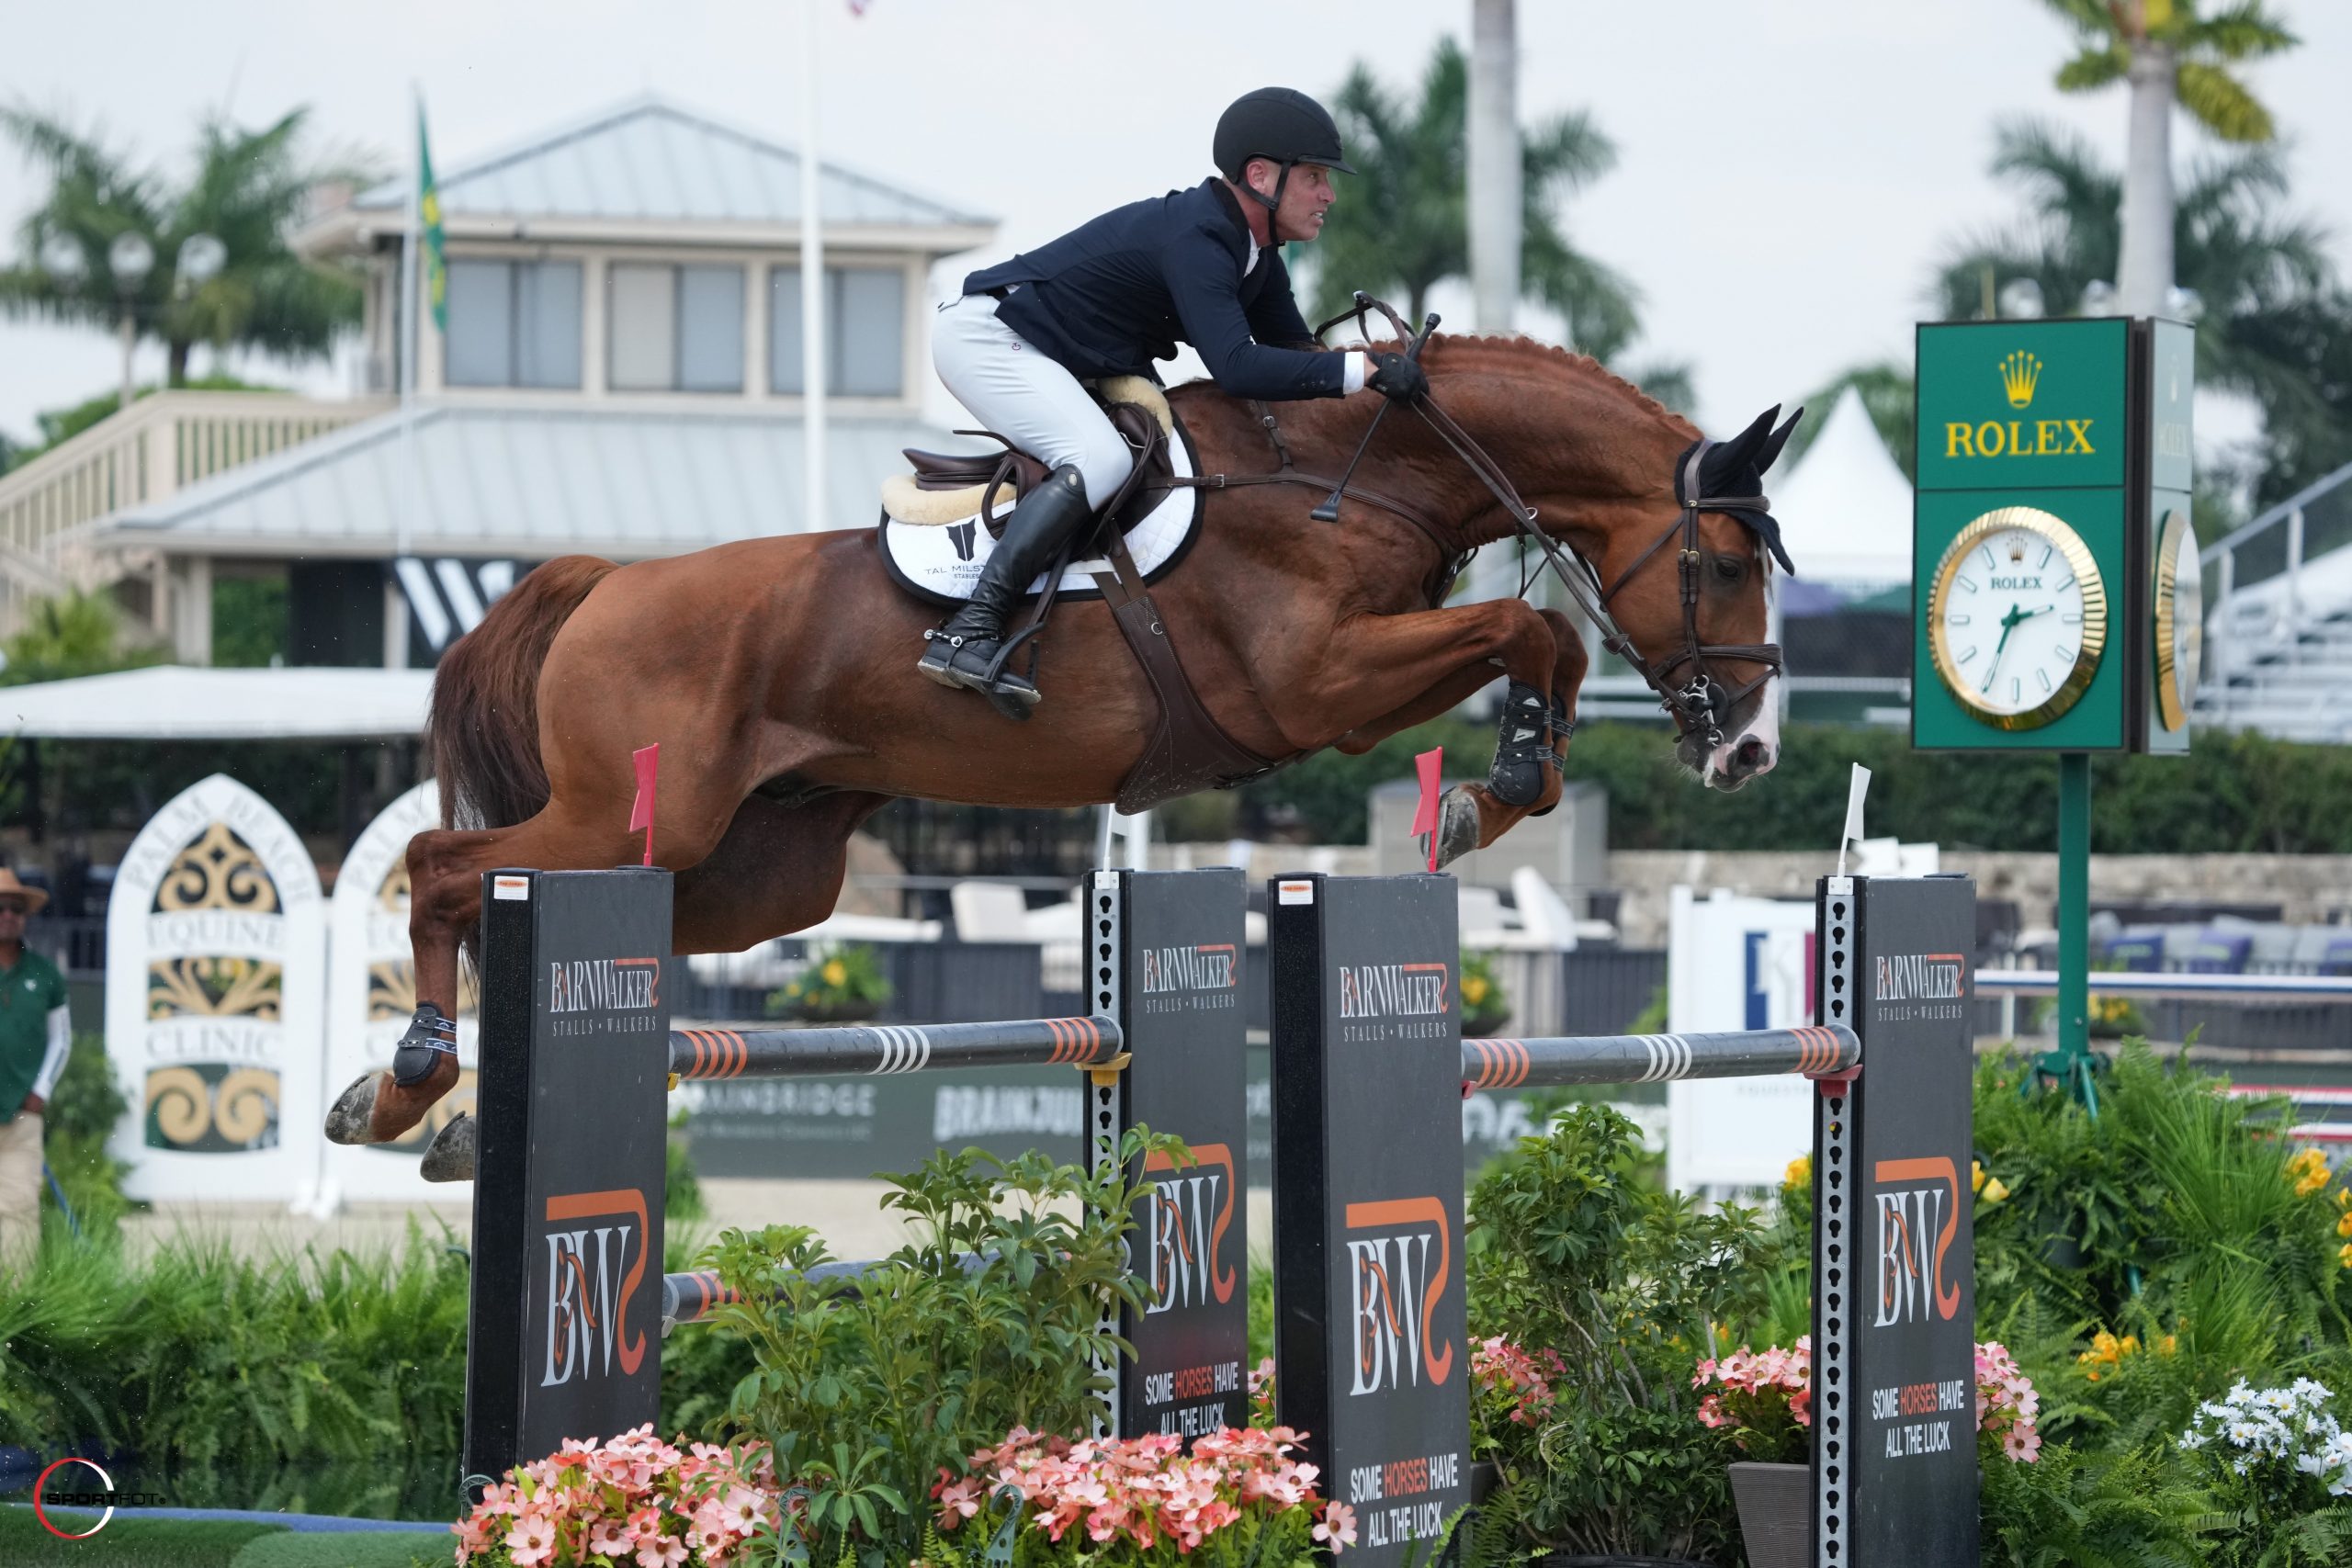 Top round for Tal Milstein & Babou in the $50,000 GP!